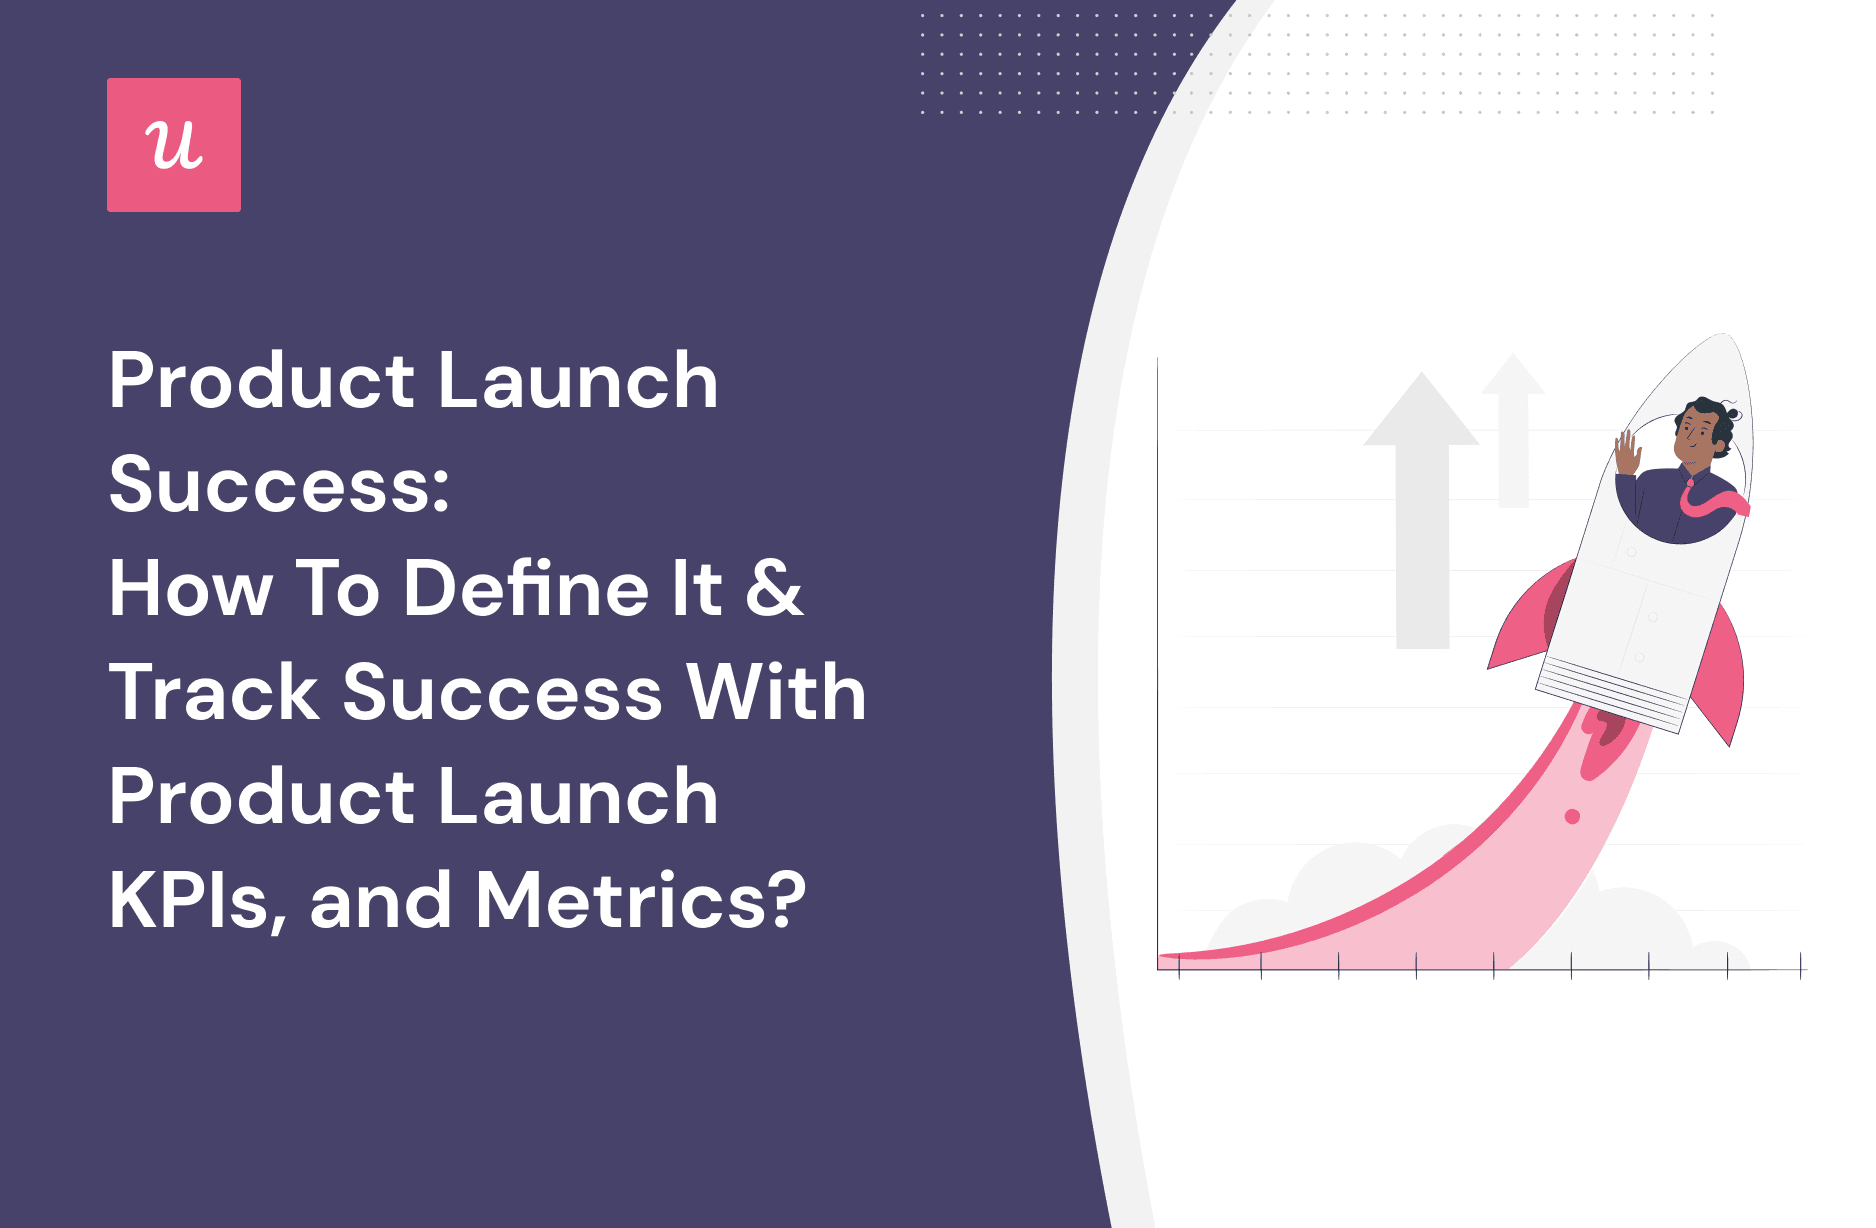 Product Launch Success: How To Define It & Track Success With Product Launch KPIs, and Metrics? cover